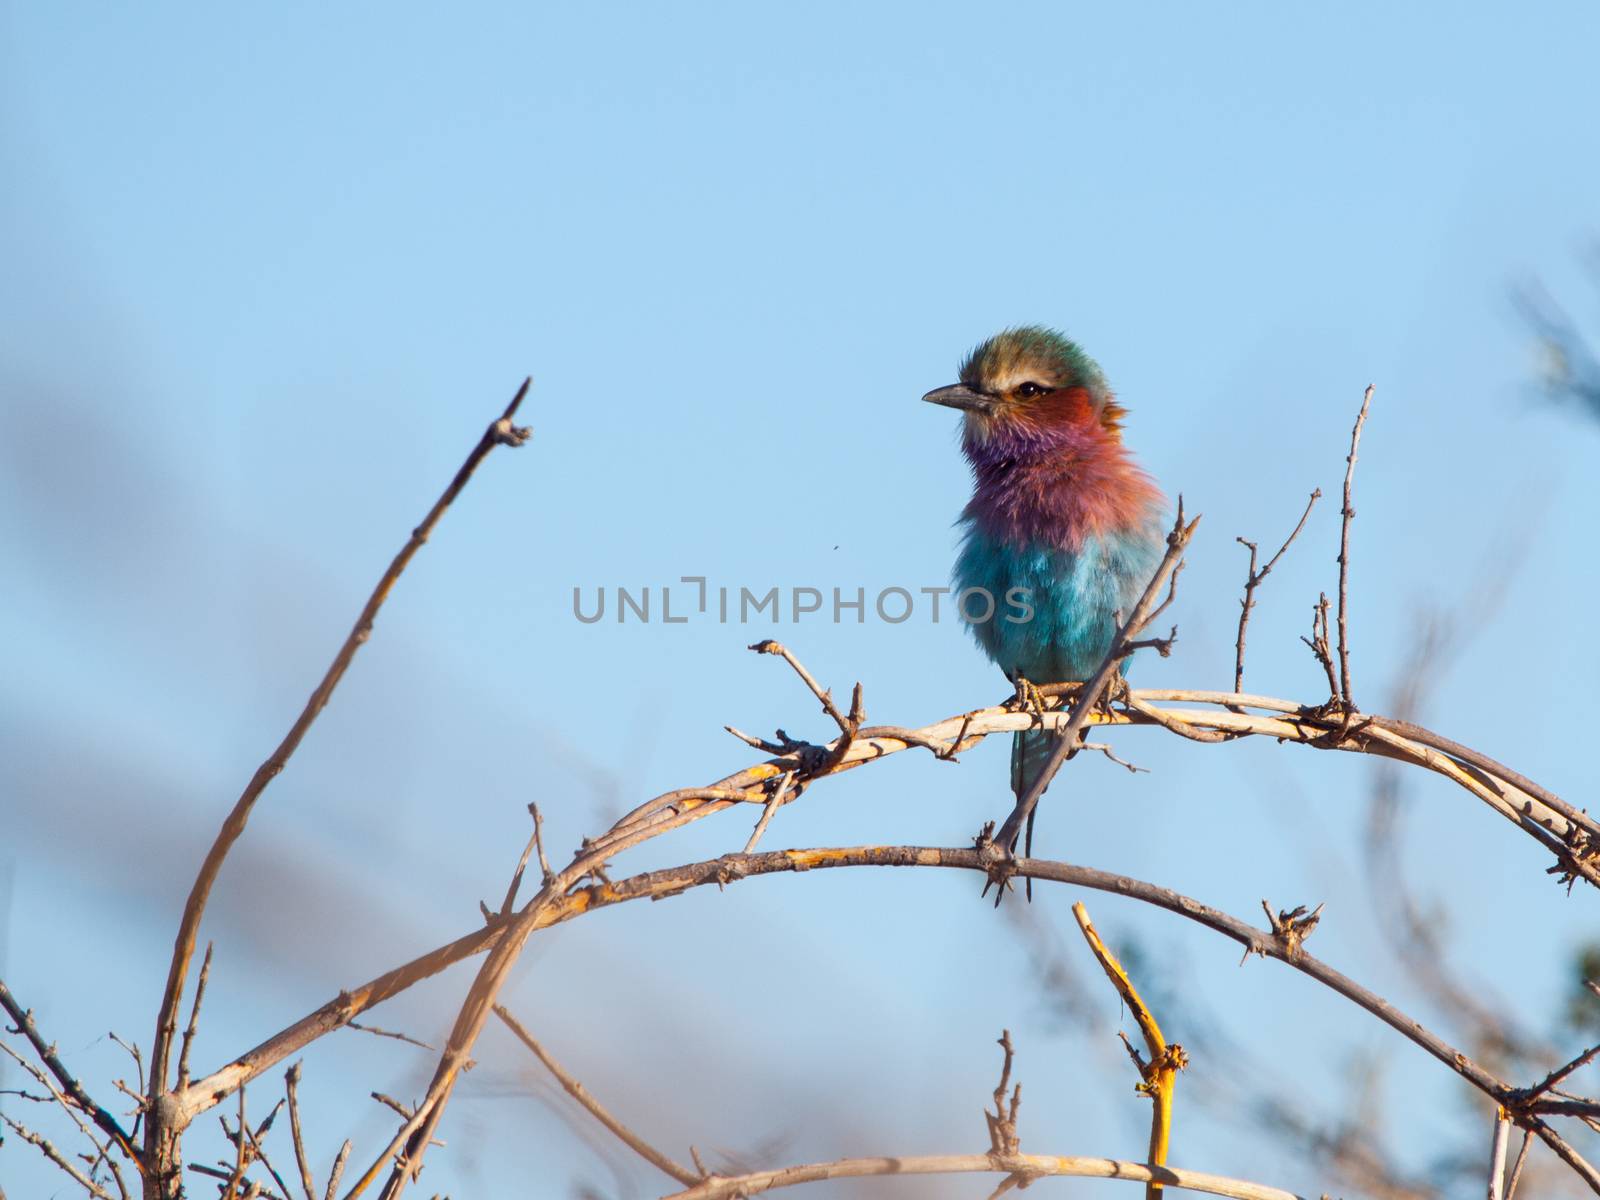 Lilac-breasted Roller (Coracias Caudatus) by pyty